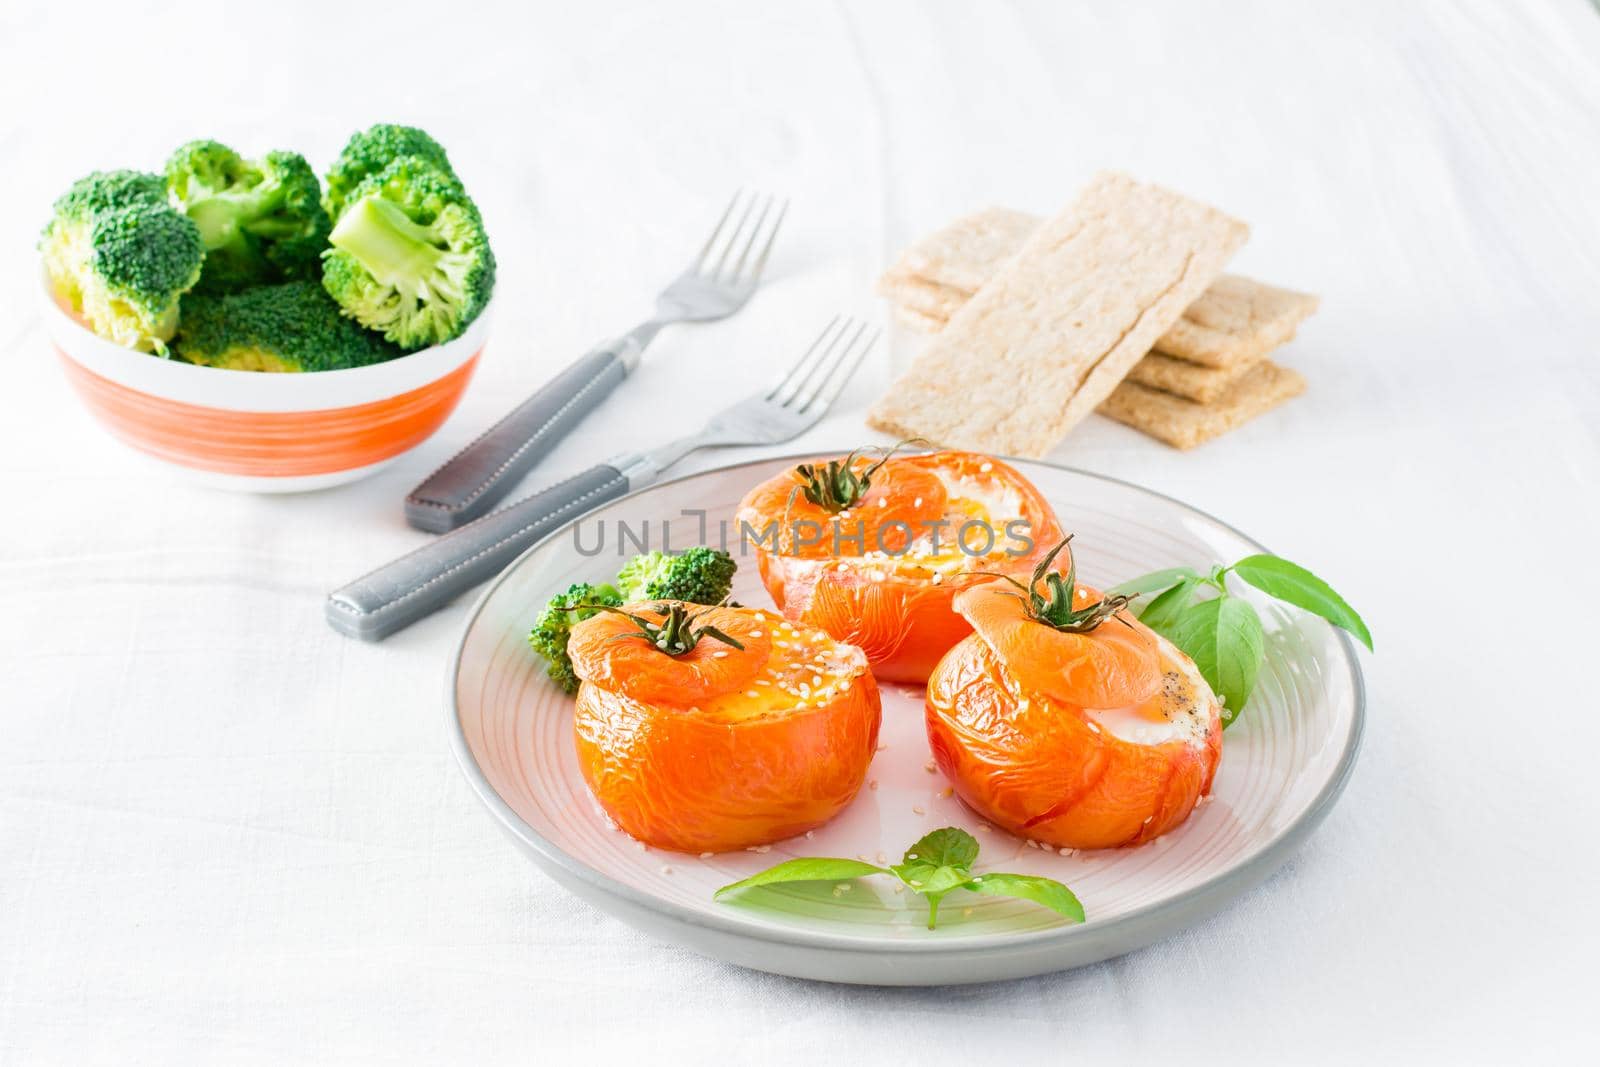 Baked tomatoes with egg, broccoli and basil leaves on a plate and a bowl of fresh broccoli. Diet lunch